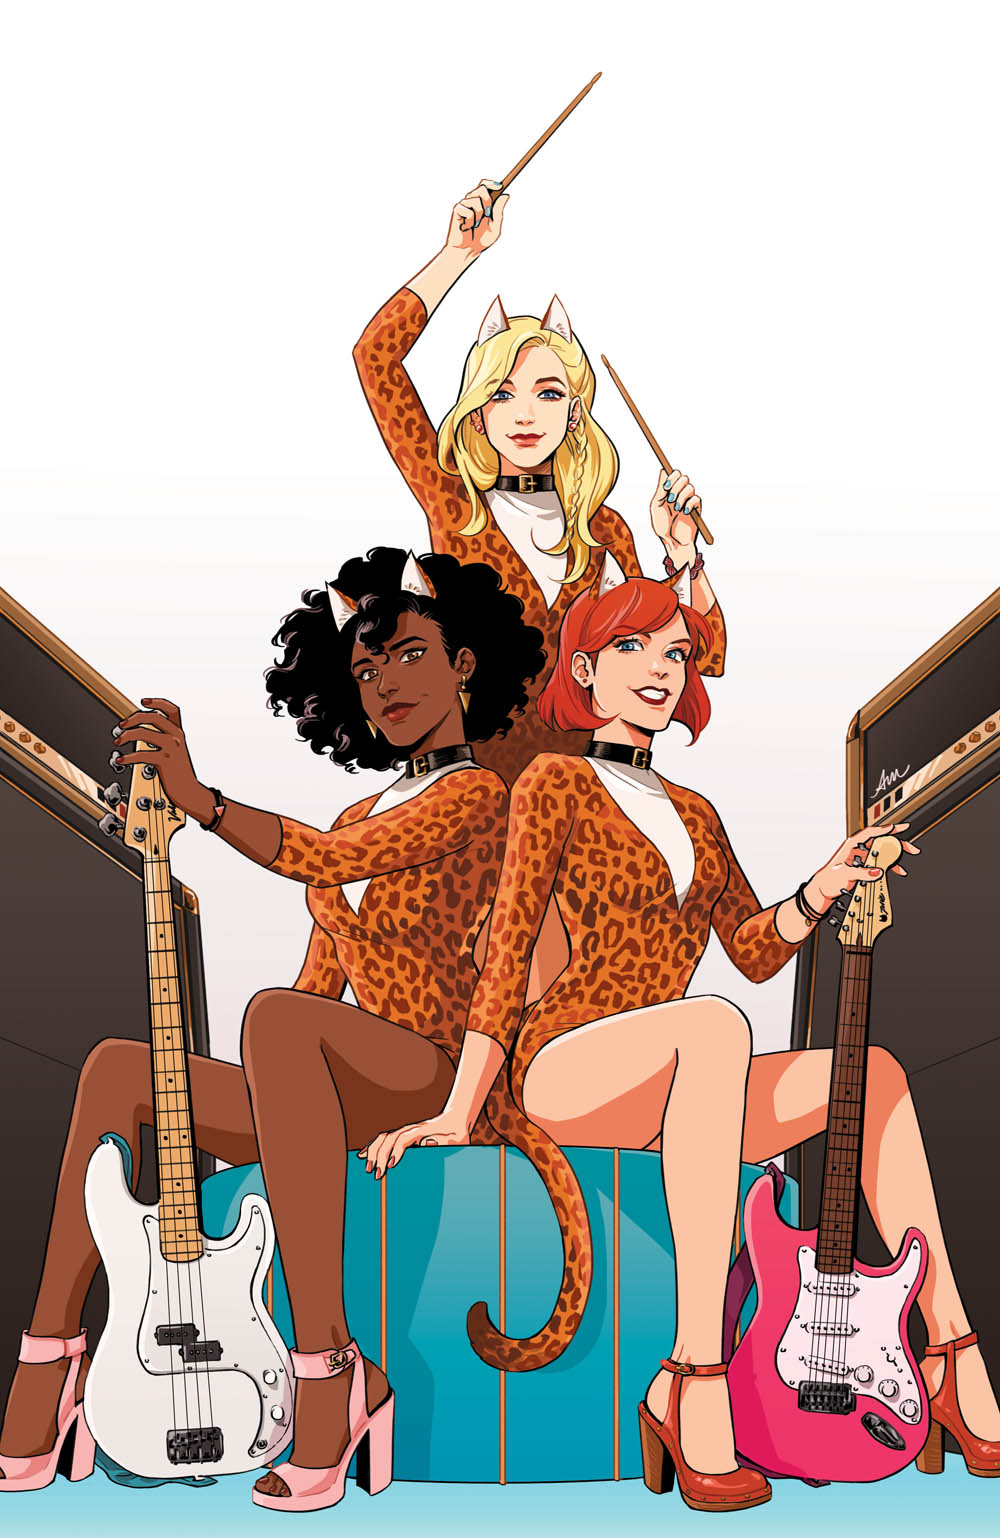 BREAKING NEWS: Josie and the Pussycats join the New Riverdale in an all-new  ongoing series from Bennett, DeOrdio, and Mok! - Archie Comics